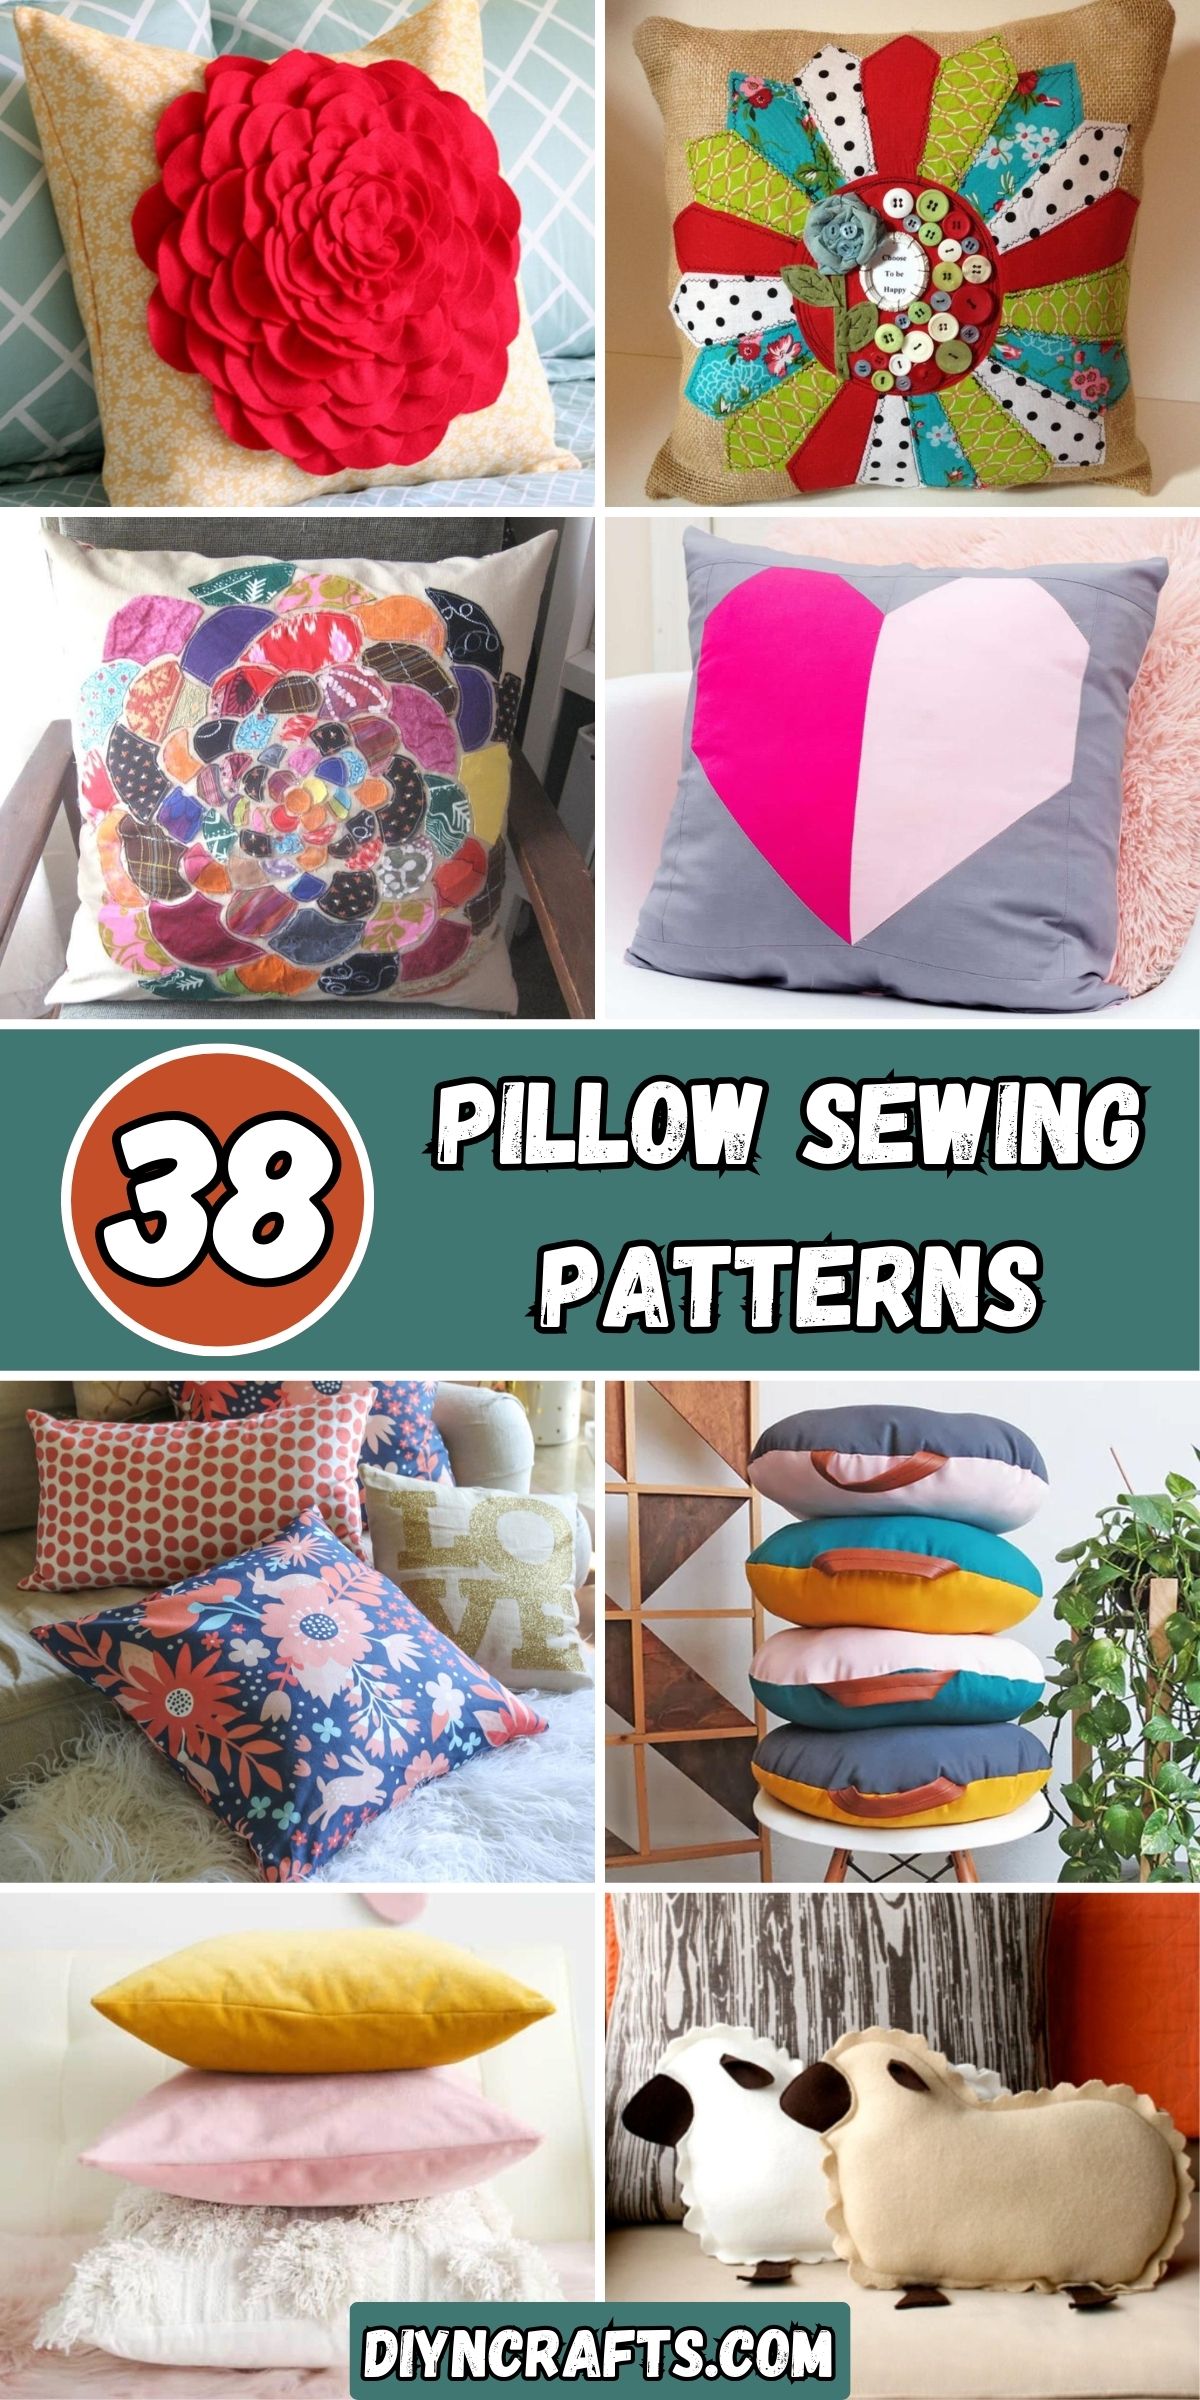 38 Pillow Sewing Patterns collage.